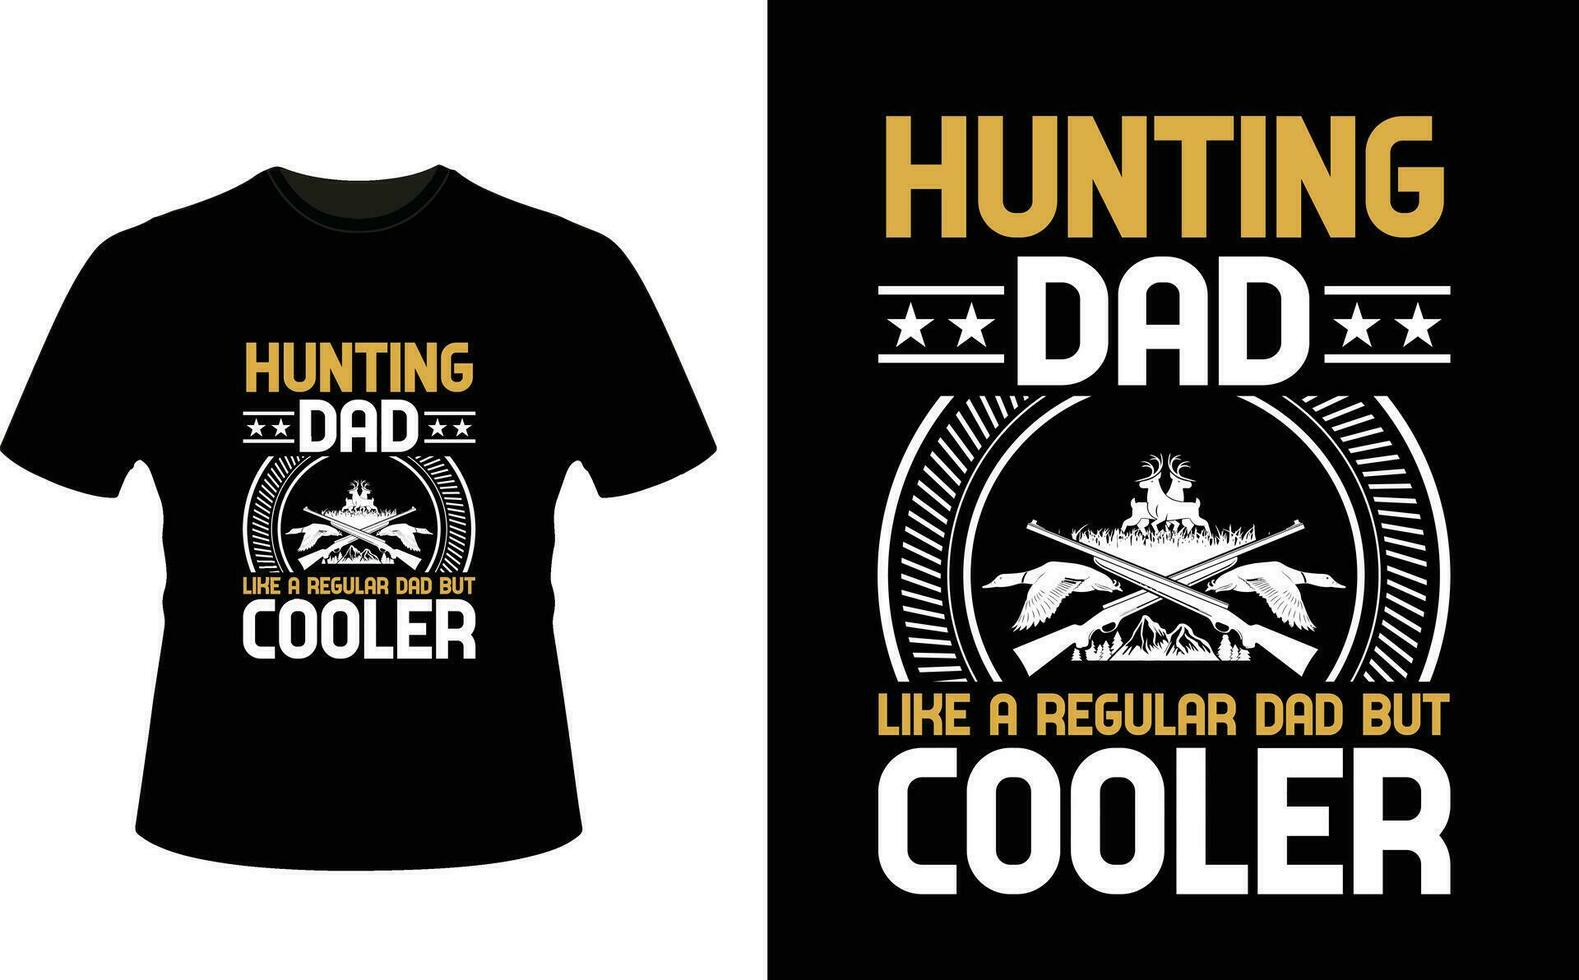 Hunting Dad Like a Regular Dad But Cooler or dad papa tshirt design or Father day t shirt Design vector